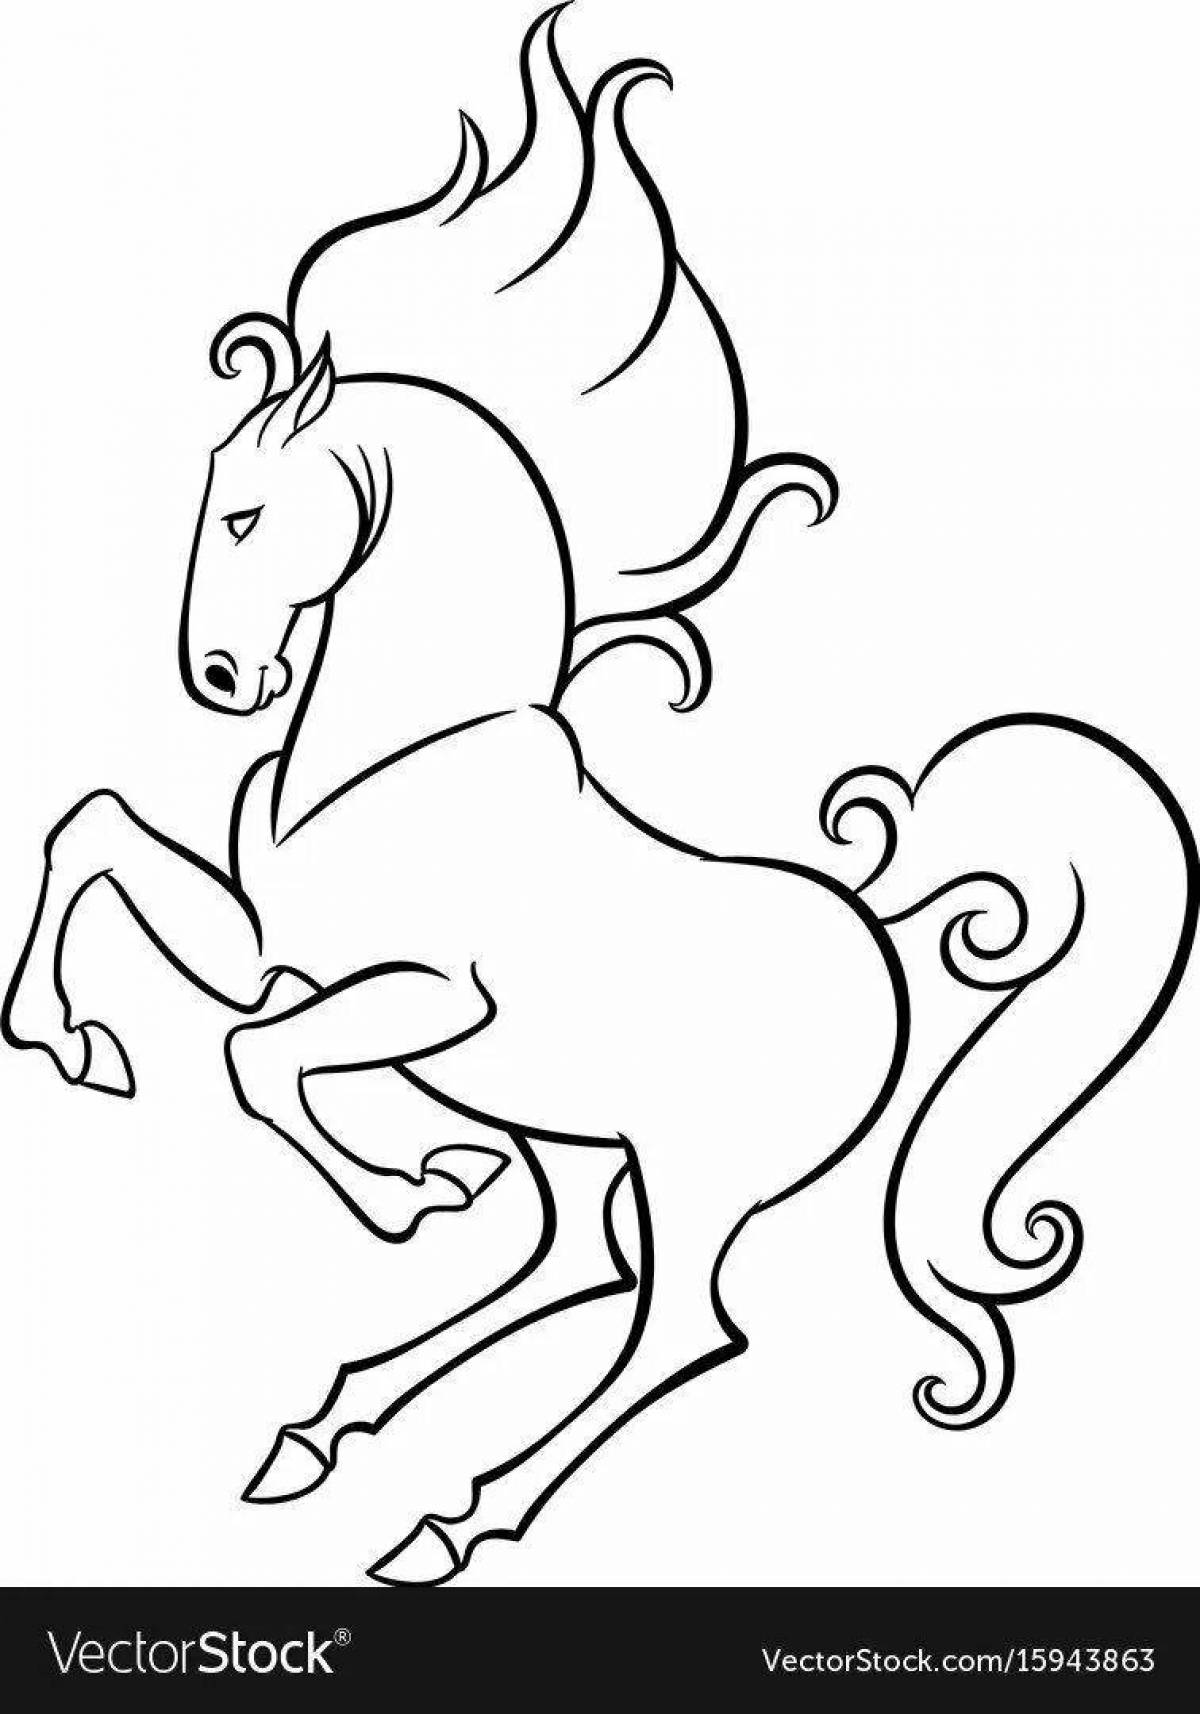 Coloring page graceful rearing horse